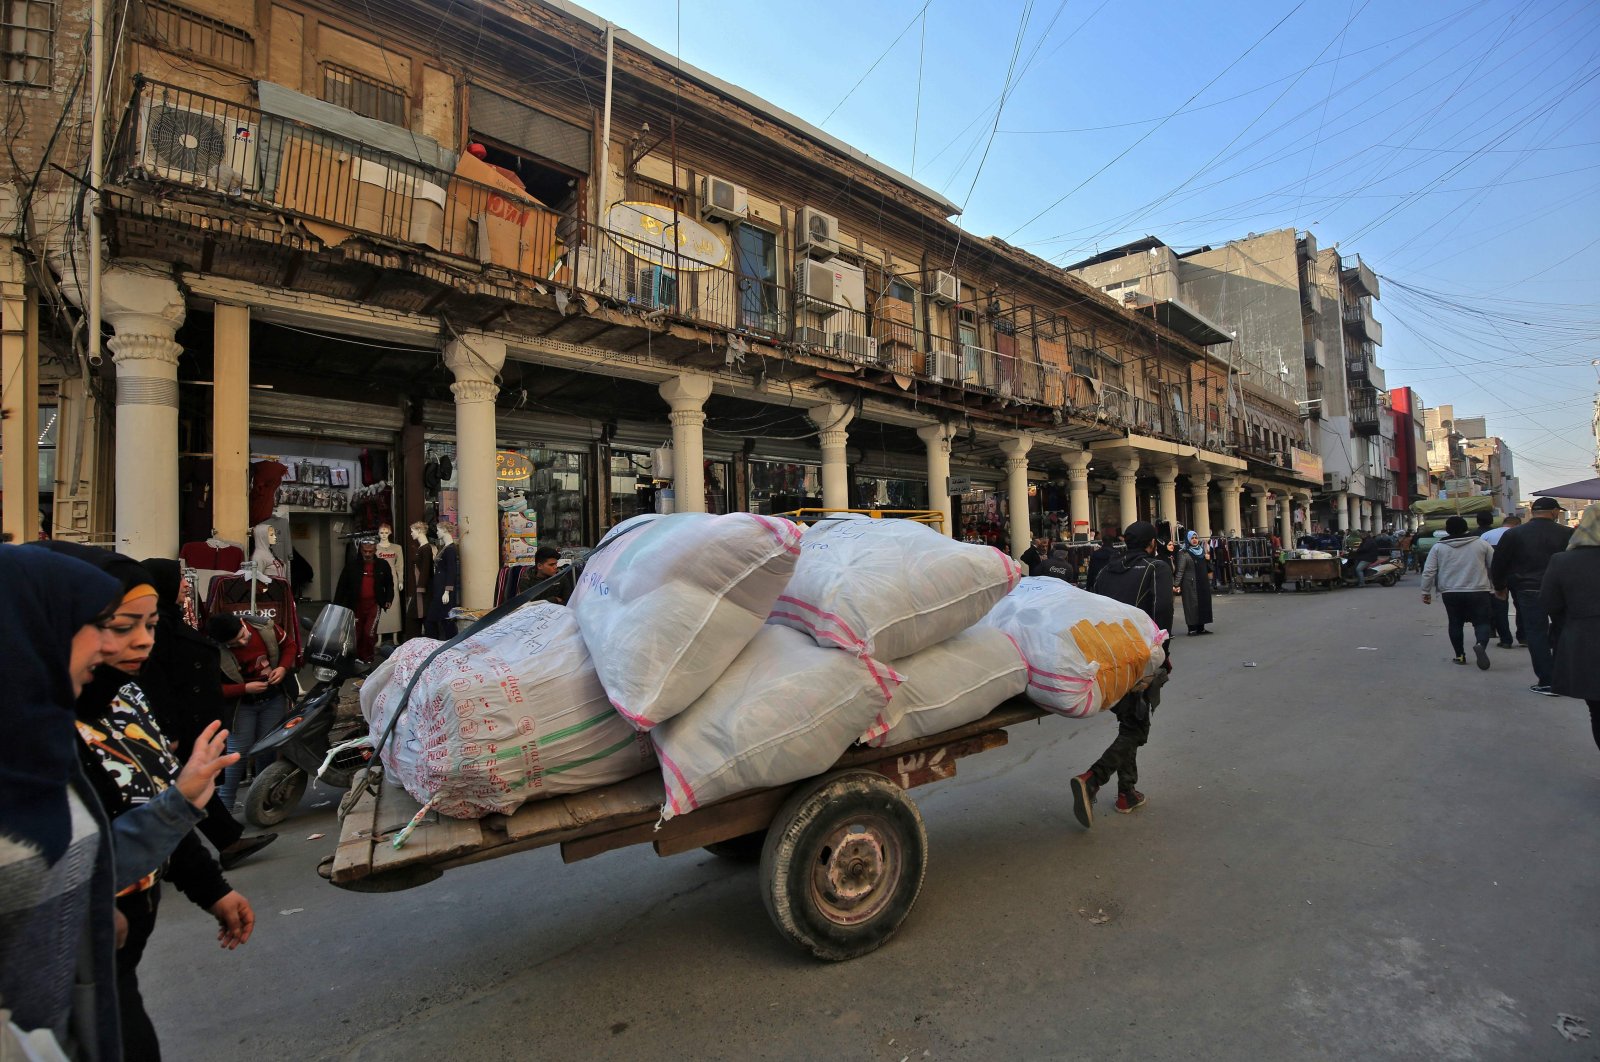 A man pulls a cart loaded with sacks near the Central Bank of Iraq's headquarters along Rashid Street in the center of Iraq's capital Baghdad, Dec. 22, 2020. (AFP Photo)